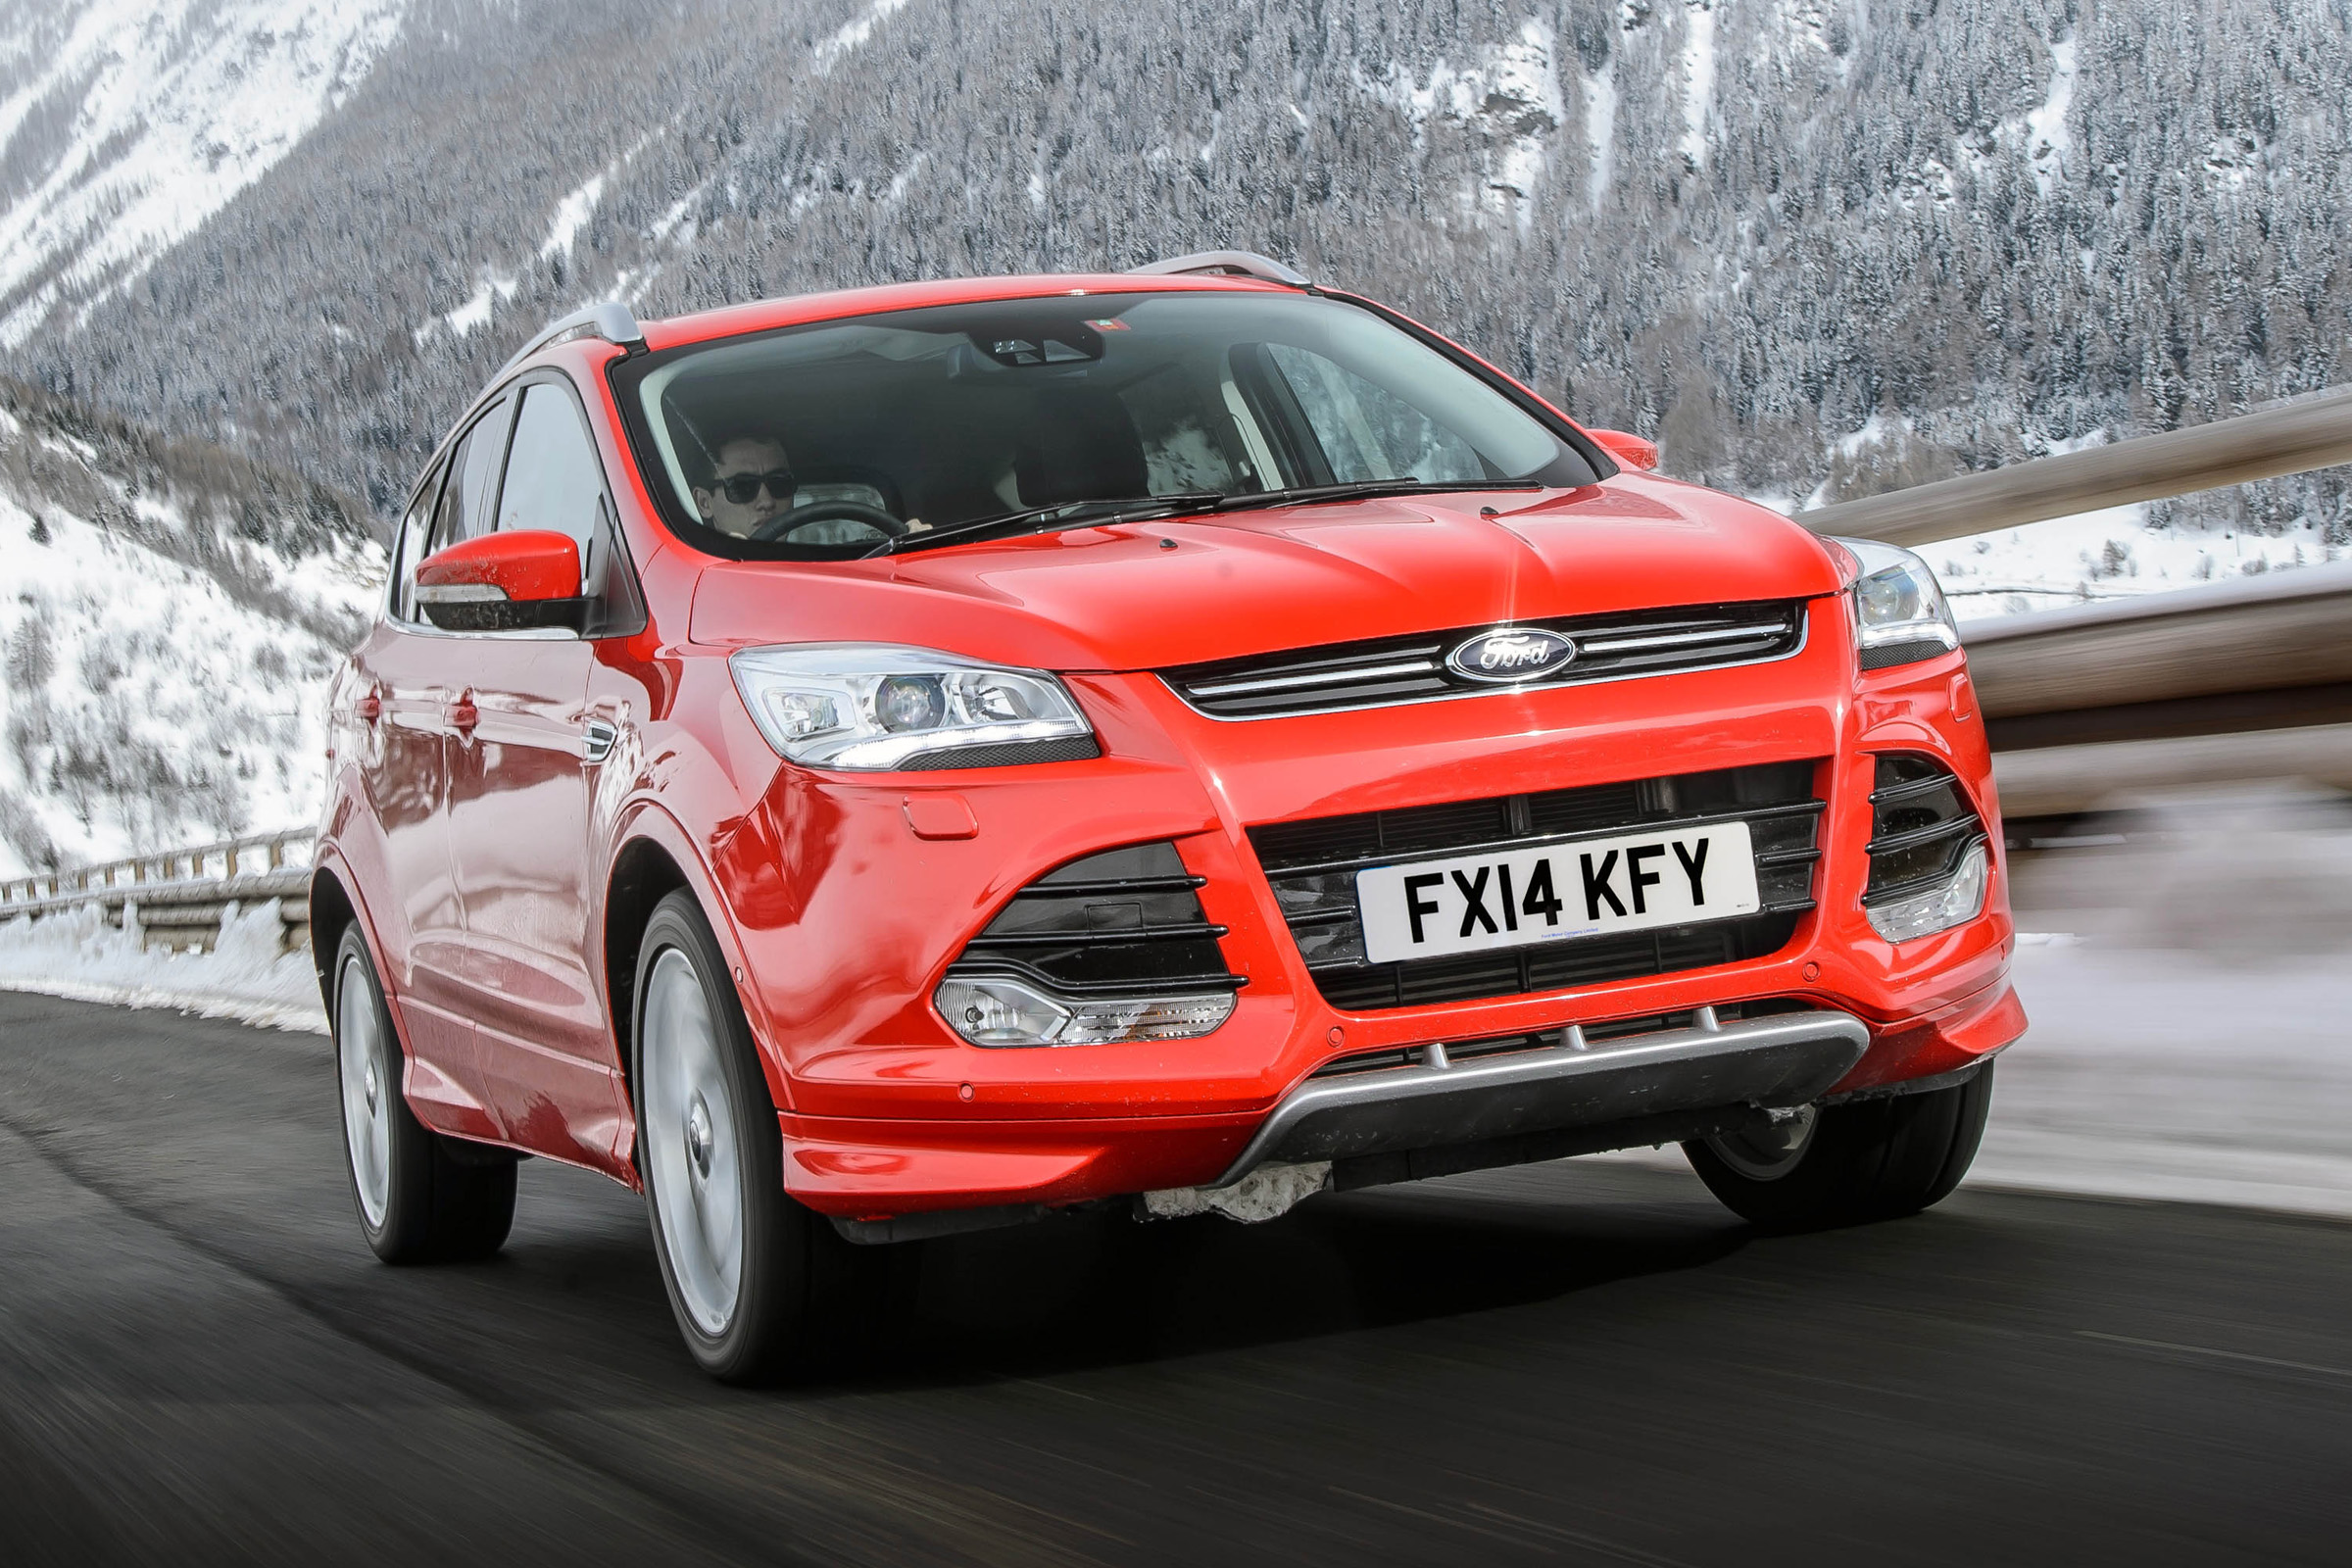 Used Ford Kuga review: 2012 to 2019 (Mk2)